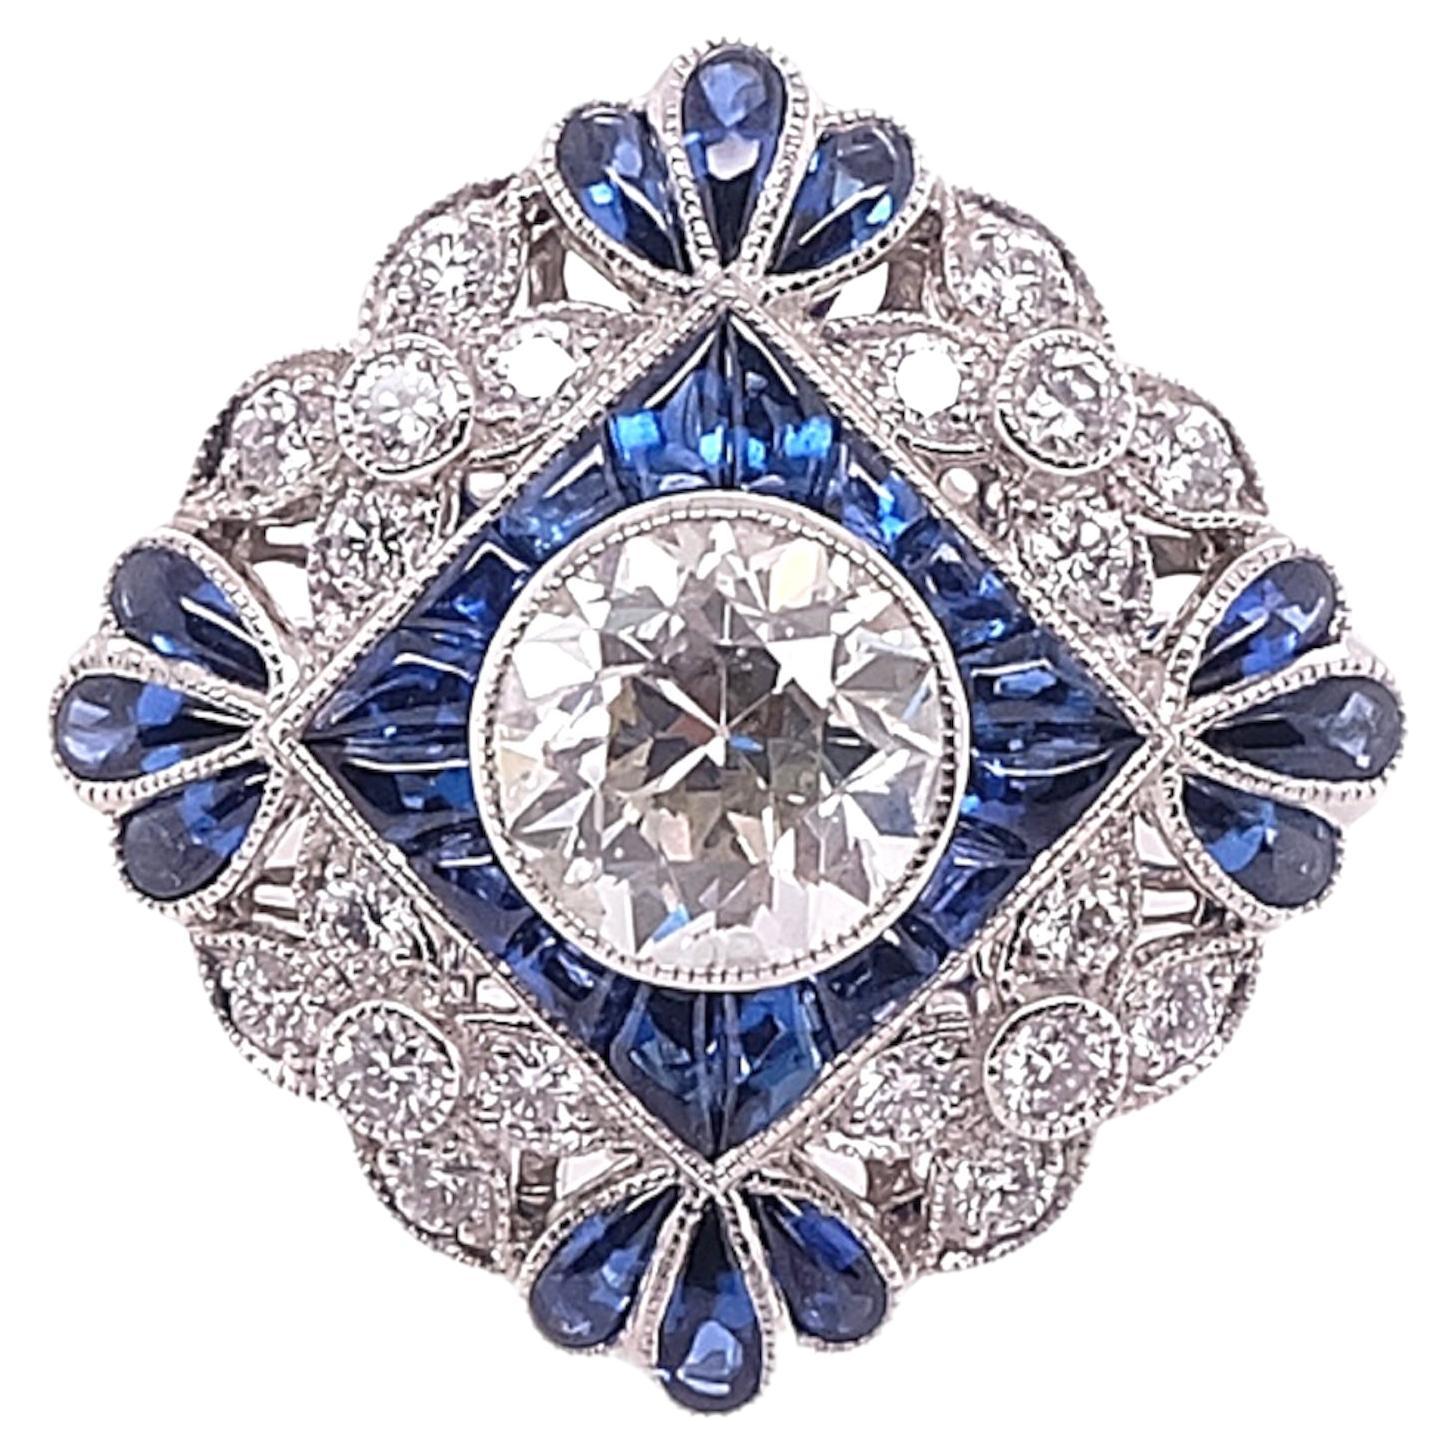 Blue Sapphire and Diamond Art Deco Style Platinum Ring by Sophia D.